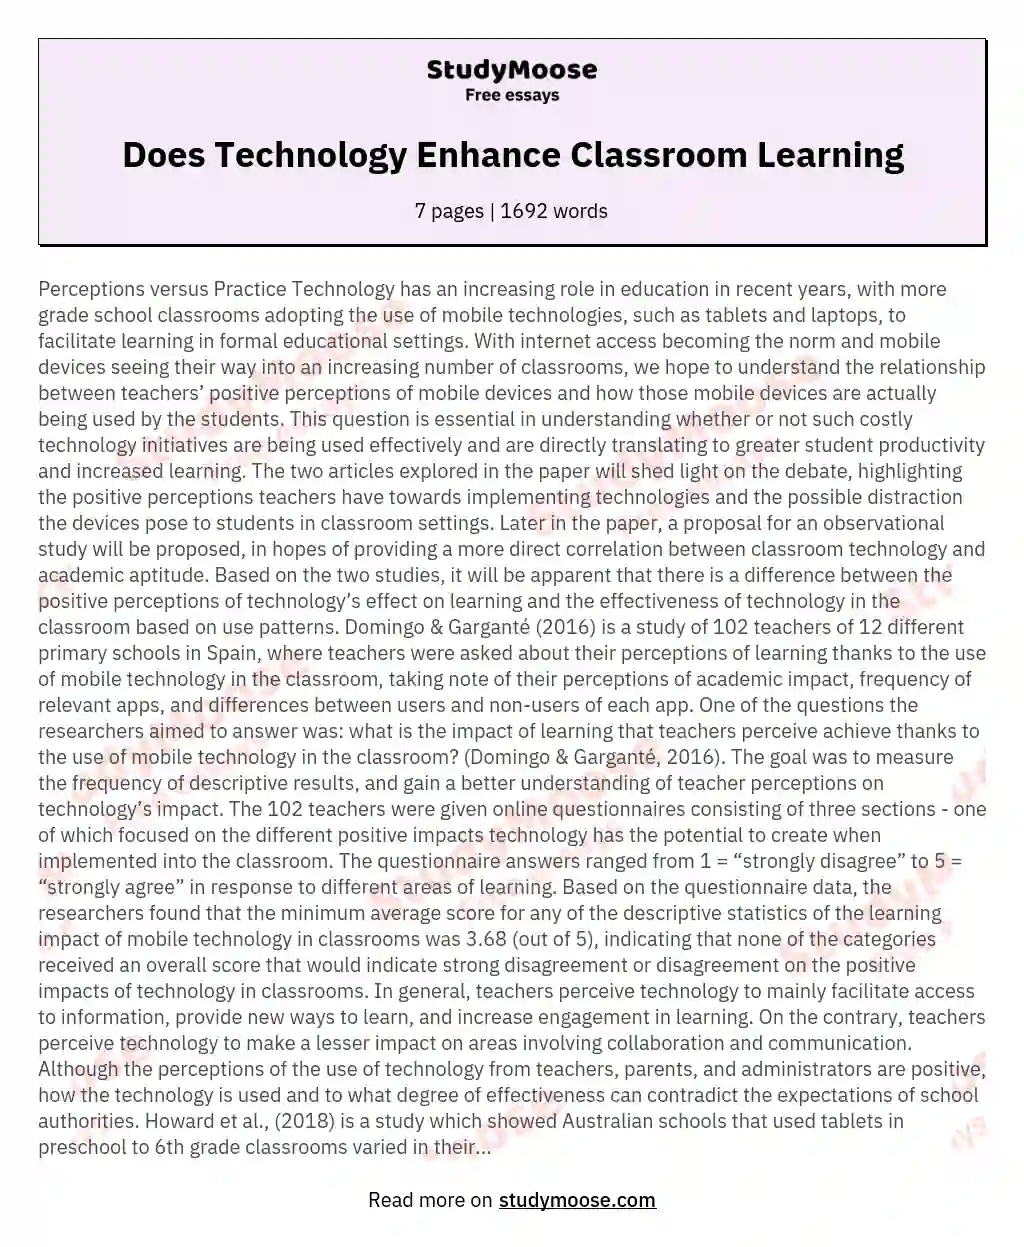 Does Technology Enhance Classroom Learning essay